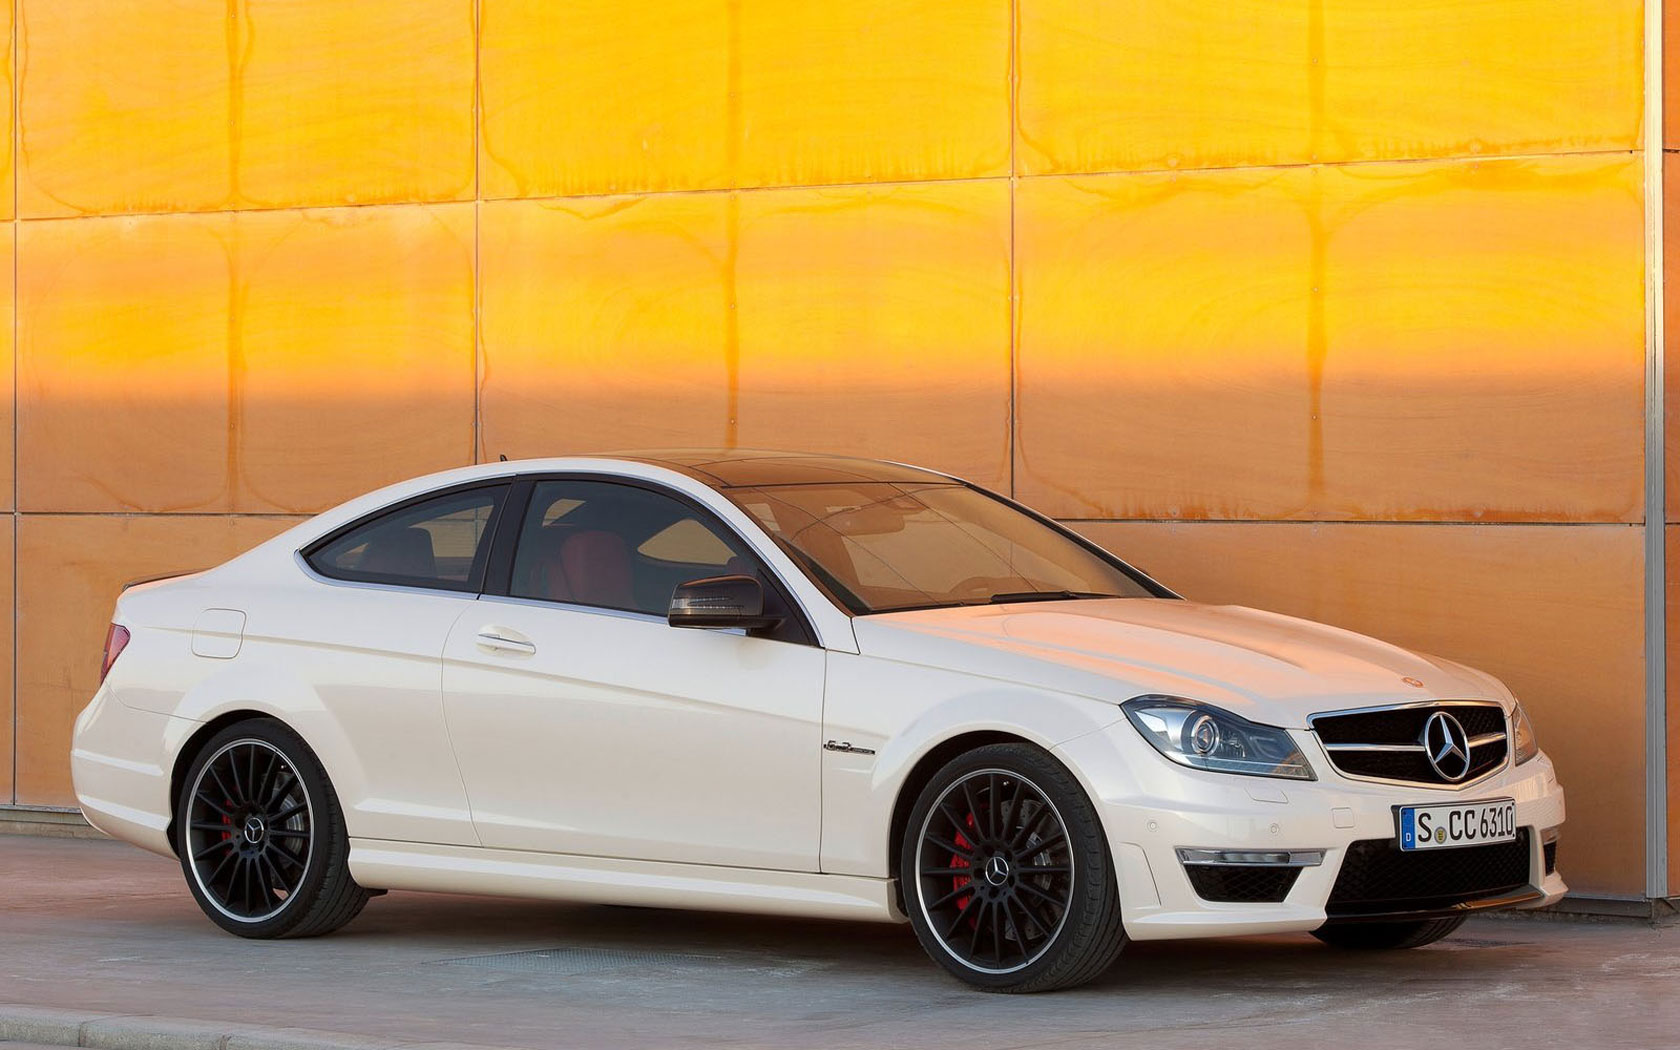 Mercedes Benz c63 AMG Coupe 2012